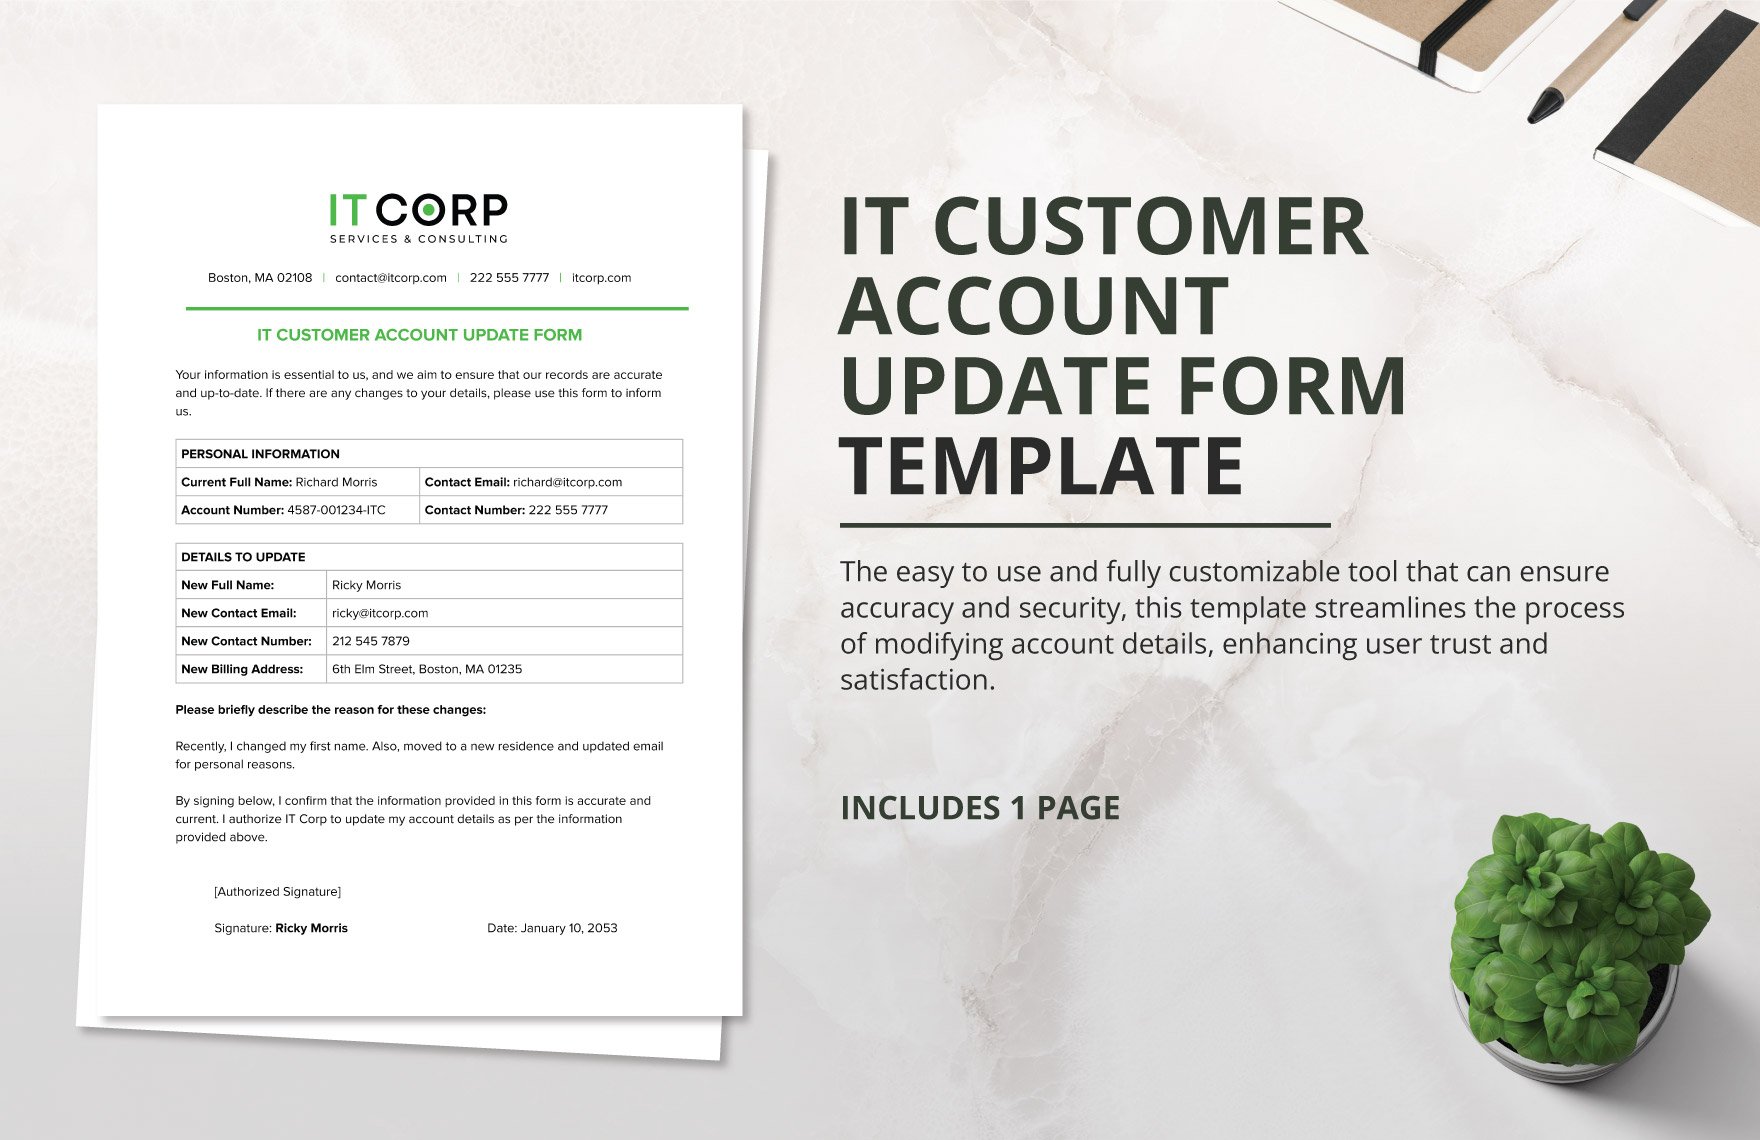 IT Customer Account Update Form Template in Word, Google Docs, PDF